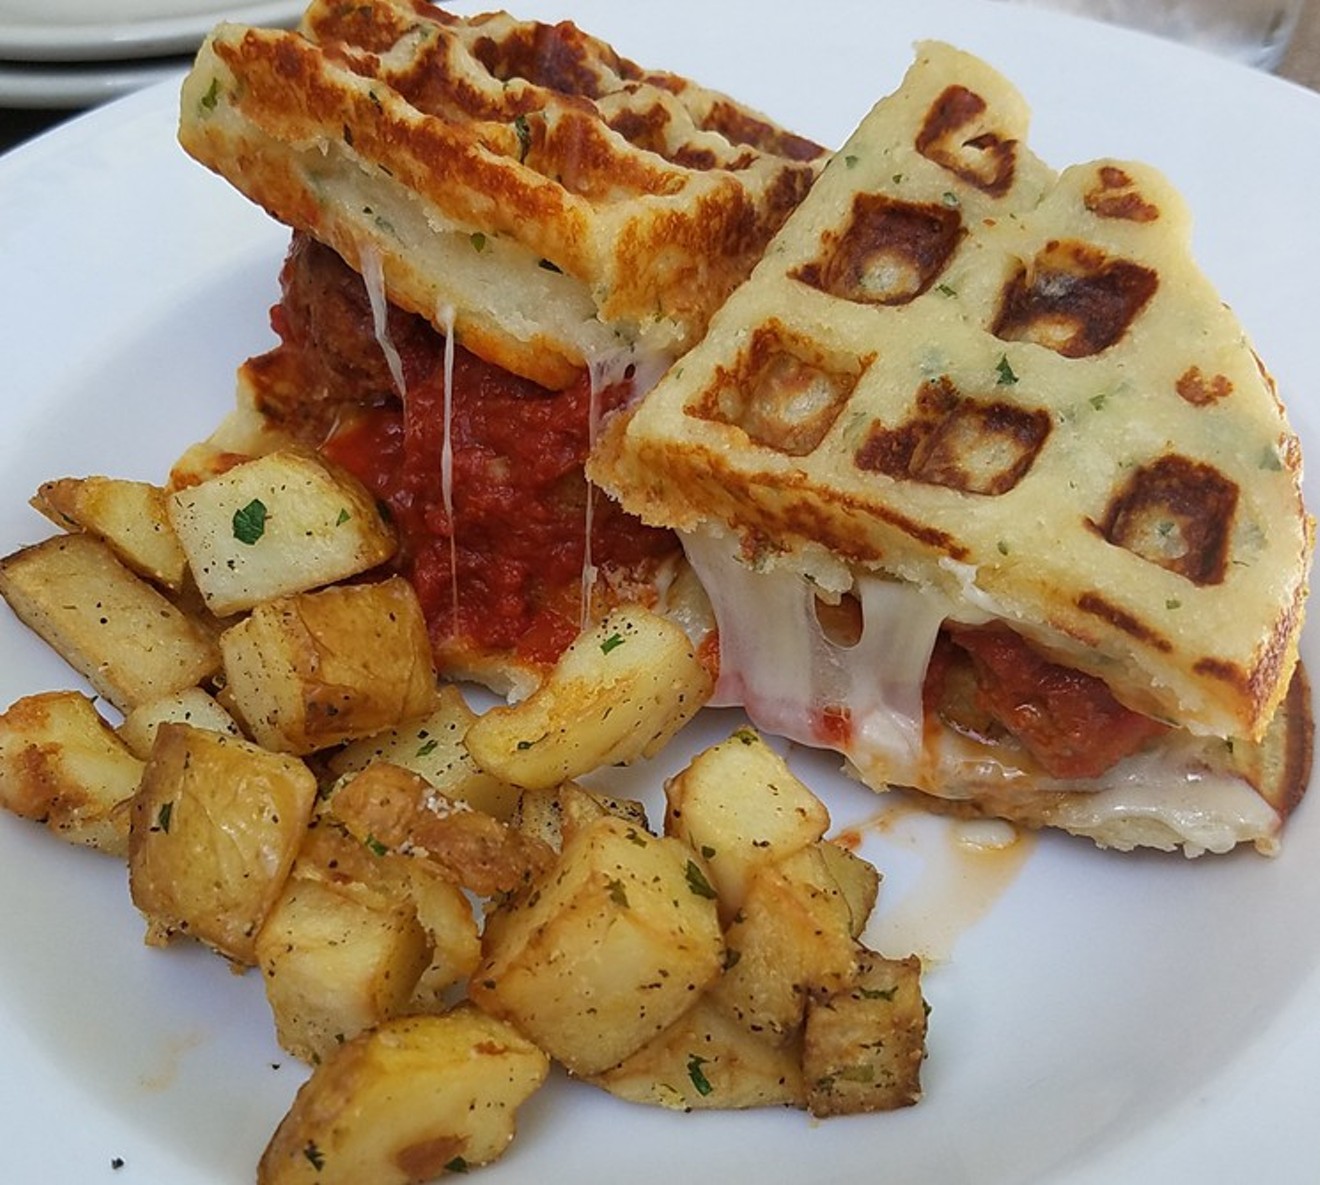 This Cane Rosso creation is no ordinary waffle. It is a savory, potatoey waffle — think part pierogi, part mashed potato pancake — stuffed with meatballs, cheese and tangy sauce.